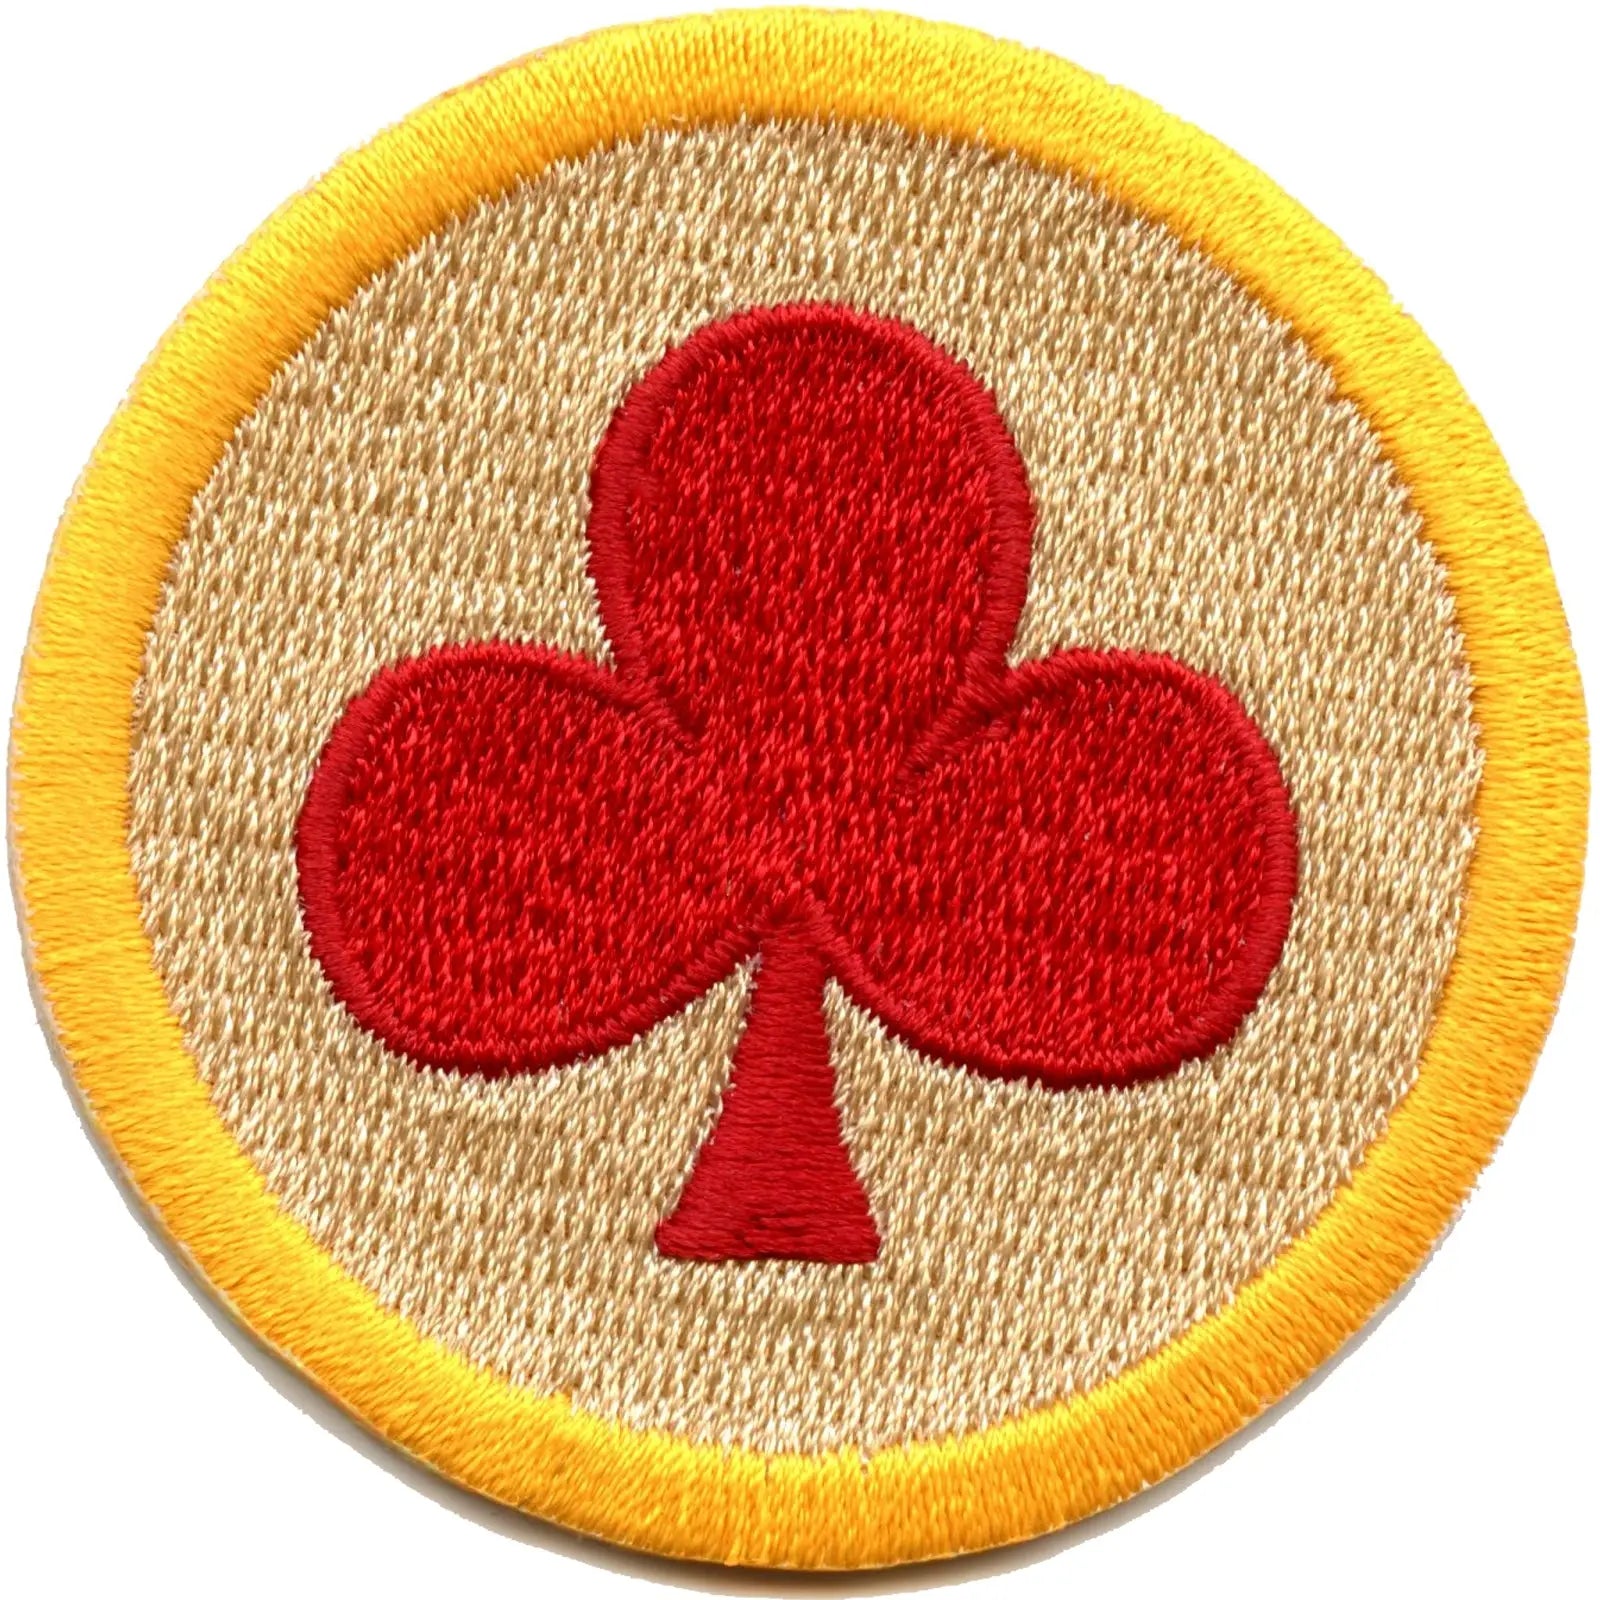 Royal Red Clubs Merit Badge Embroidered Iron-on Patch 